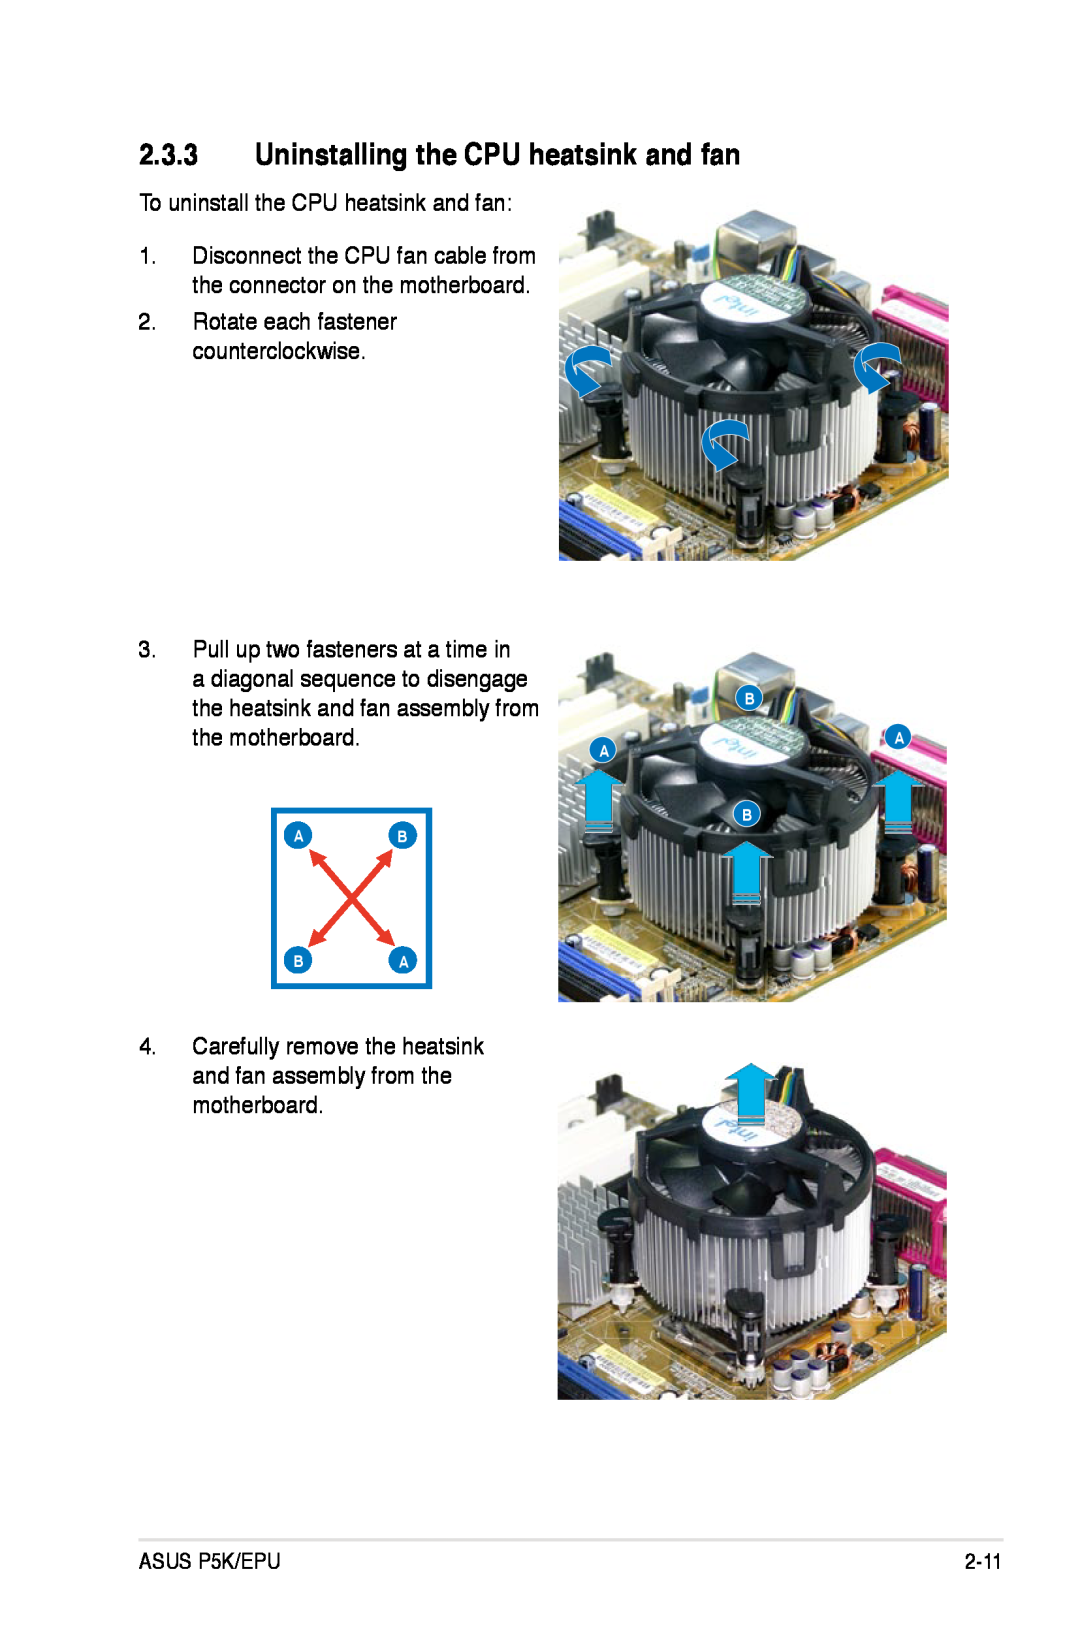 Asus P5K/EPU manual Uninstalling the CPU heatsink and fan, the heatsink and fan assembly from, the motherboard 